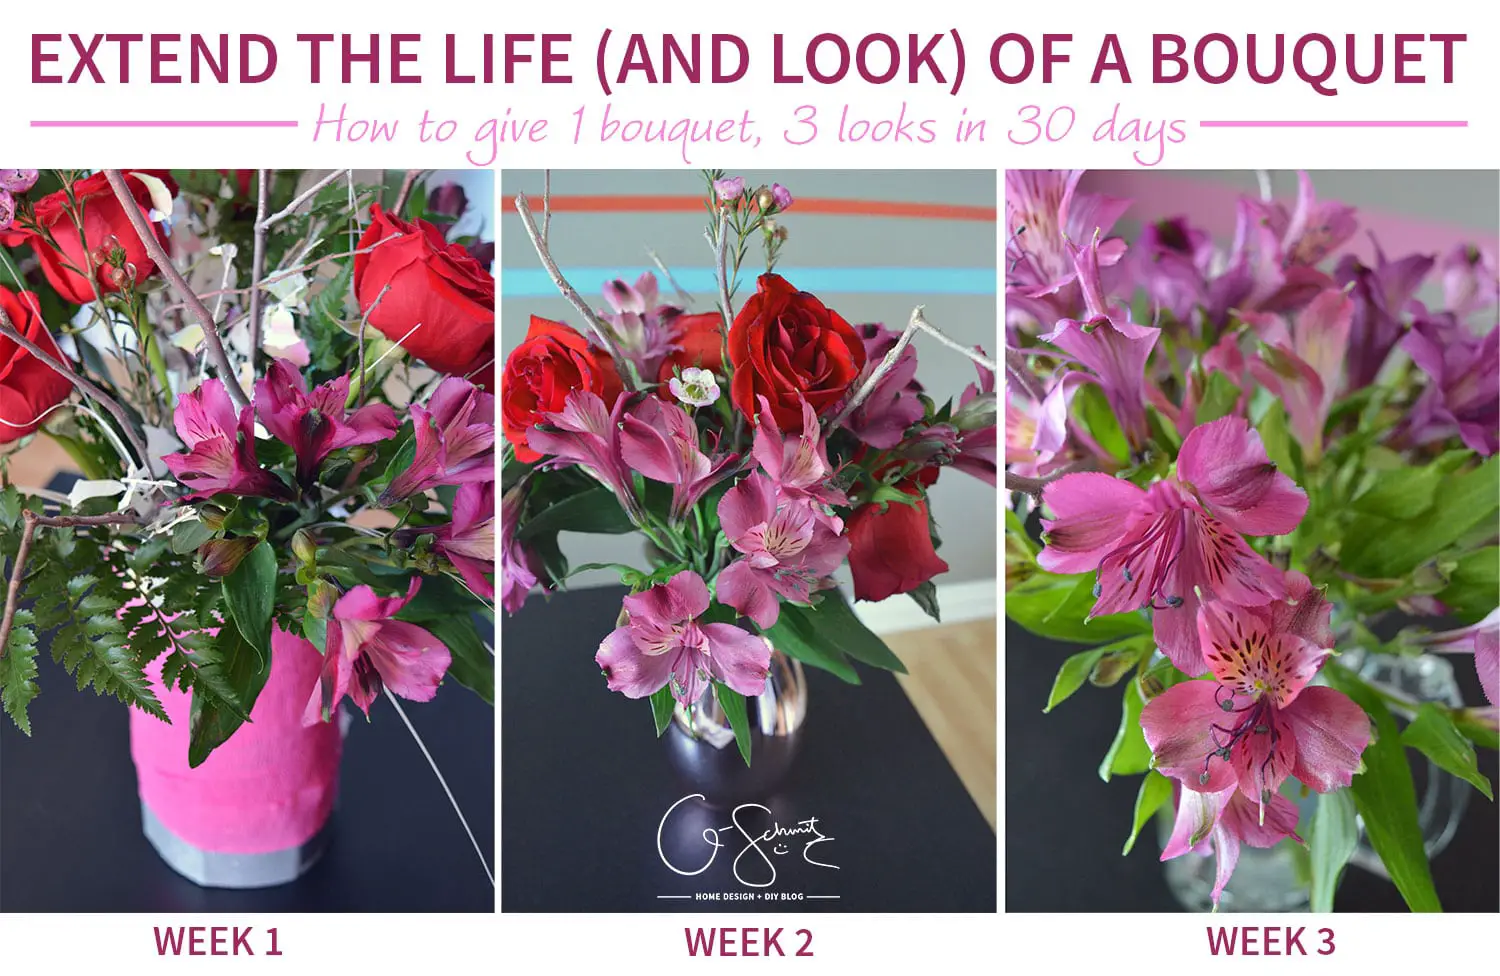 Give 1 Bouquet 3 Looks in 30 days! How to use a generic store bought